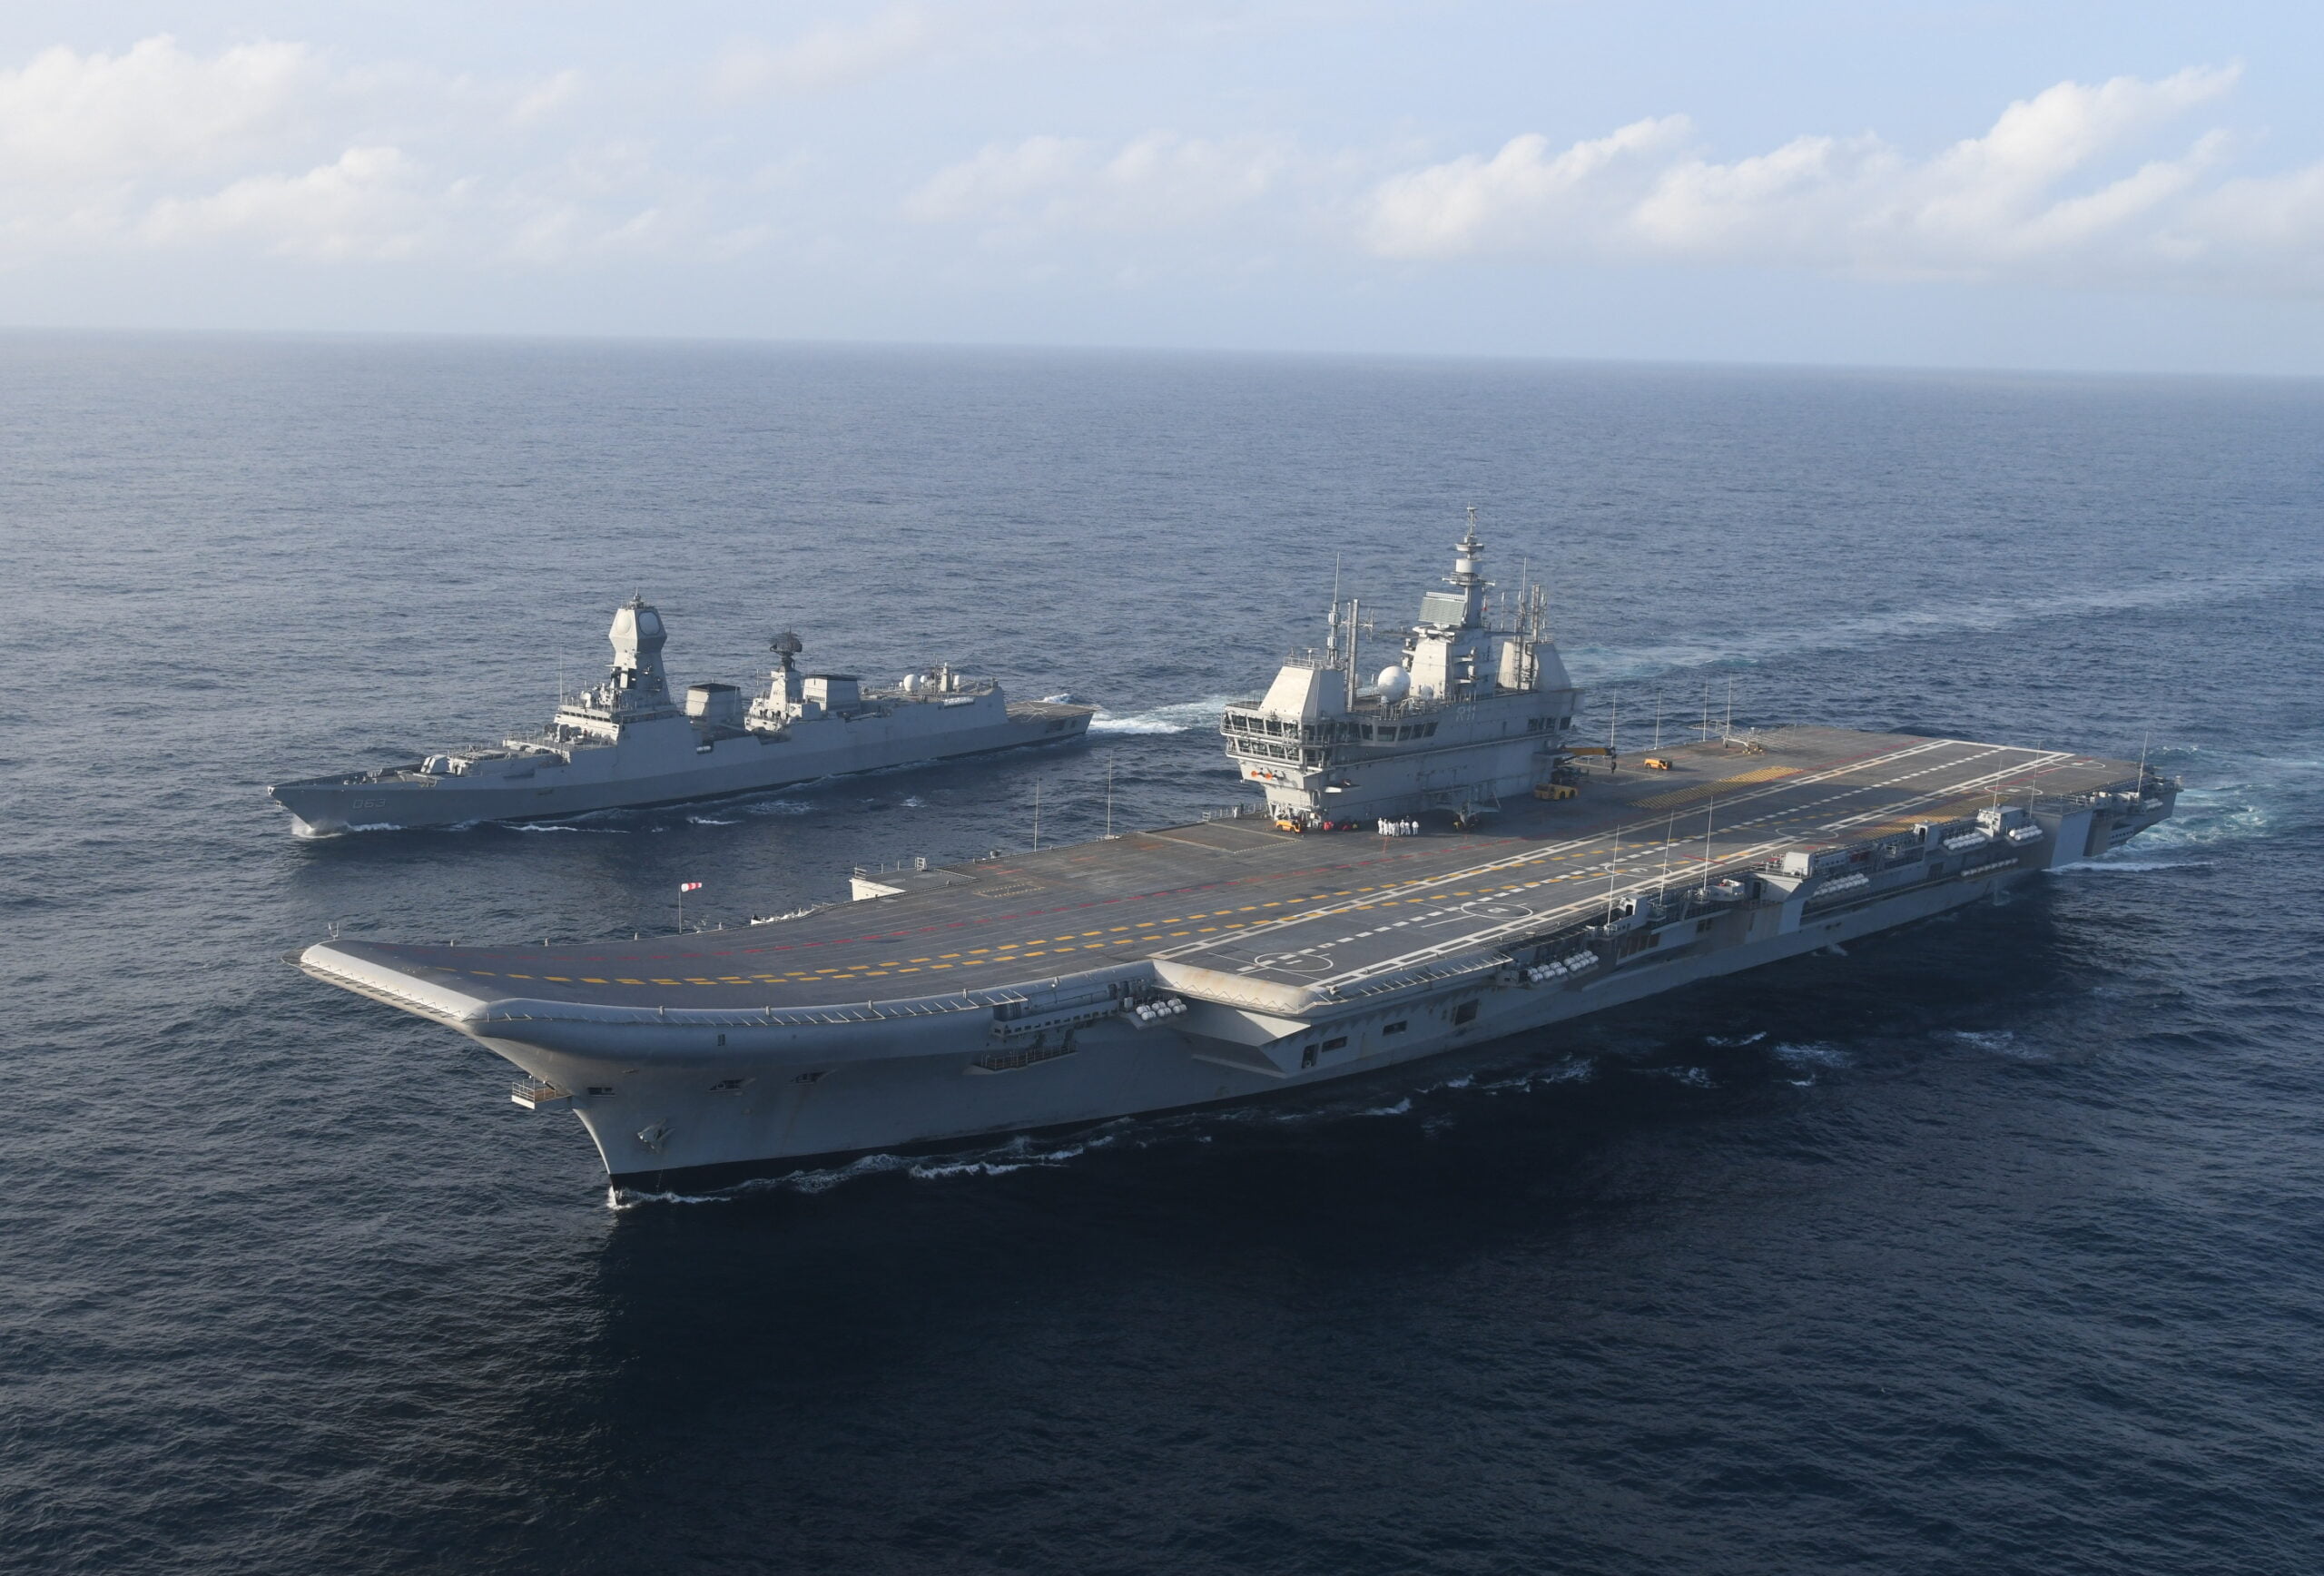 France, US Tussle To Sell Fighter Jets For India's Homemade Aircraft Carrier